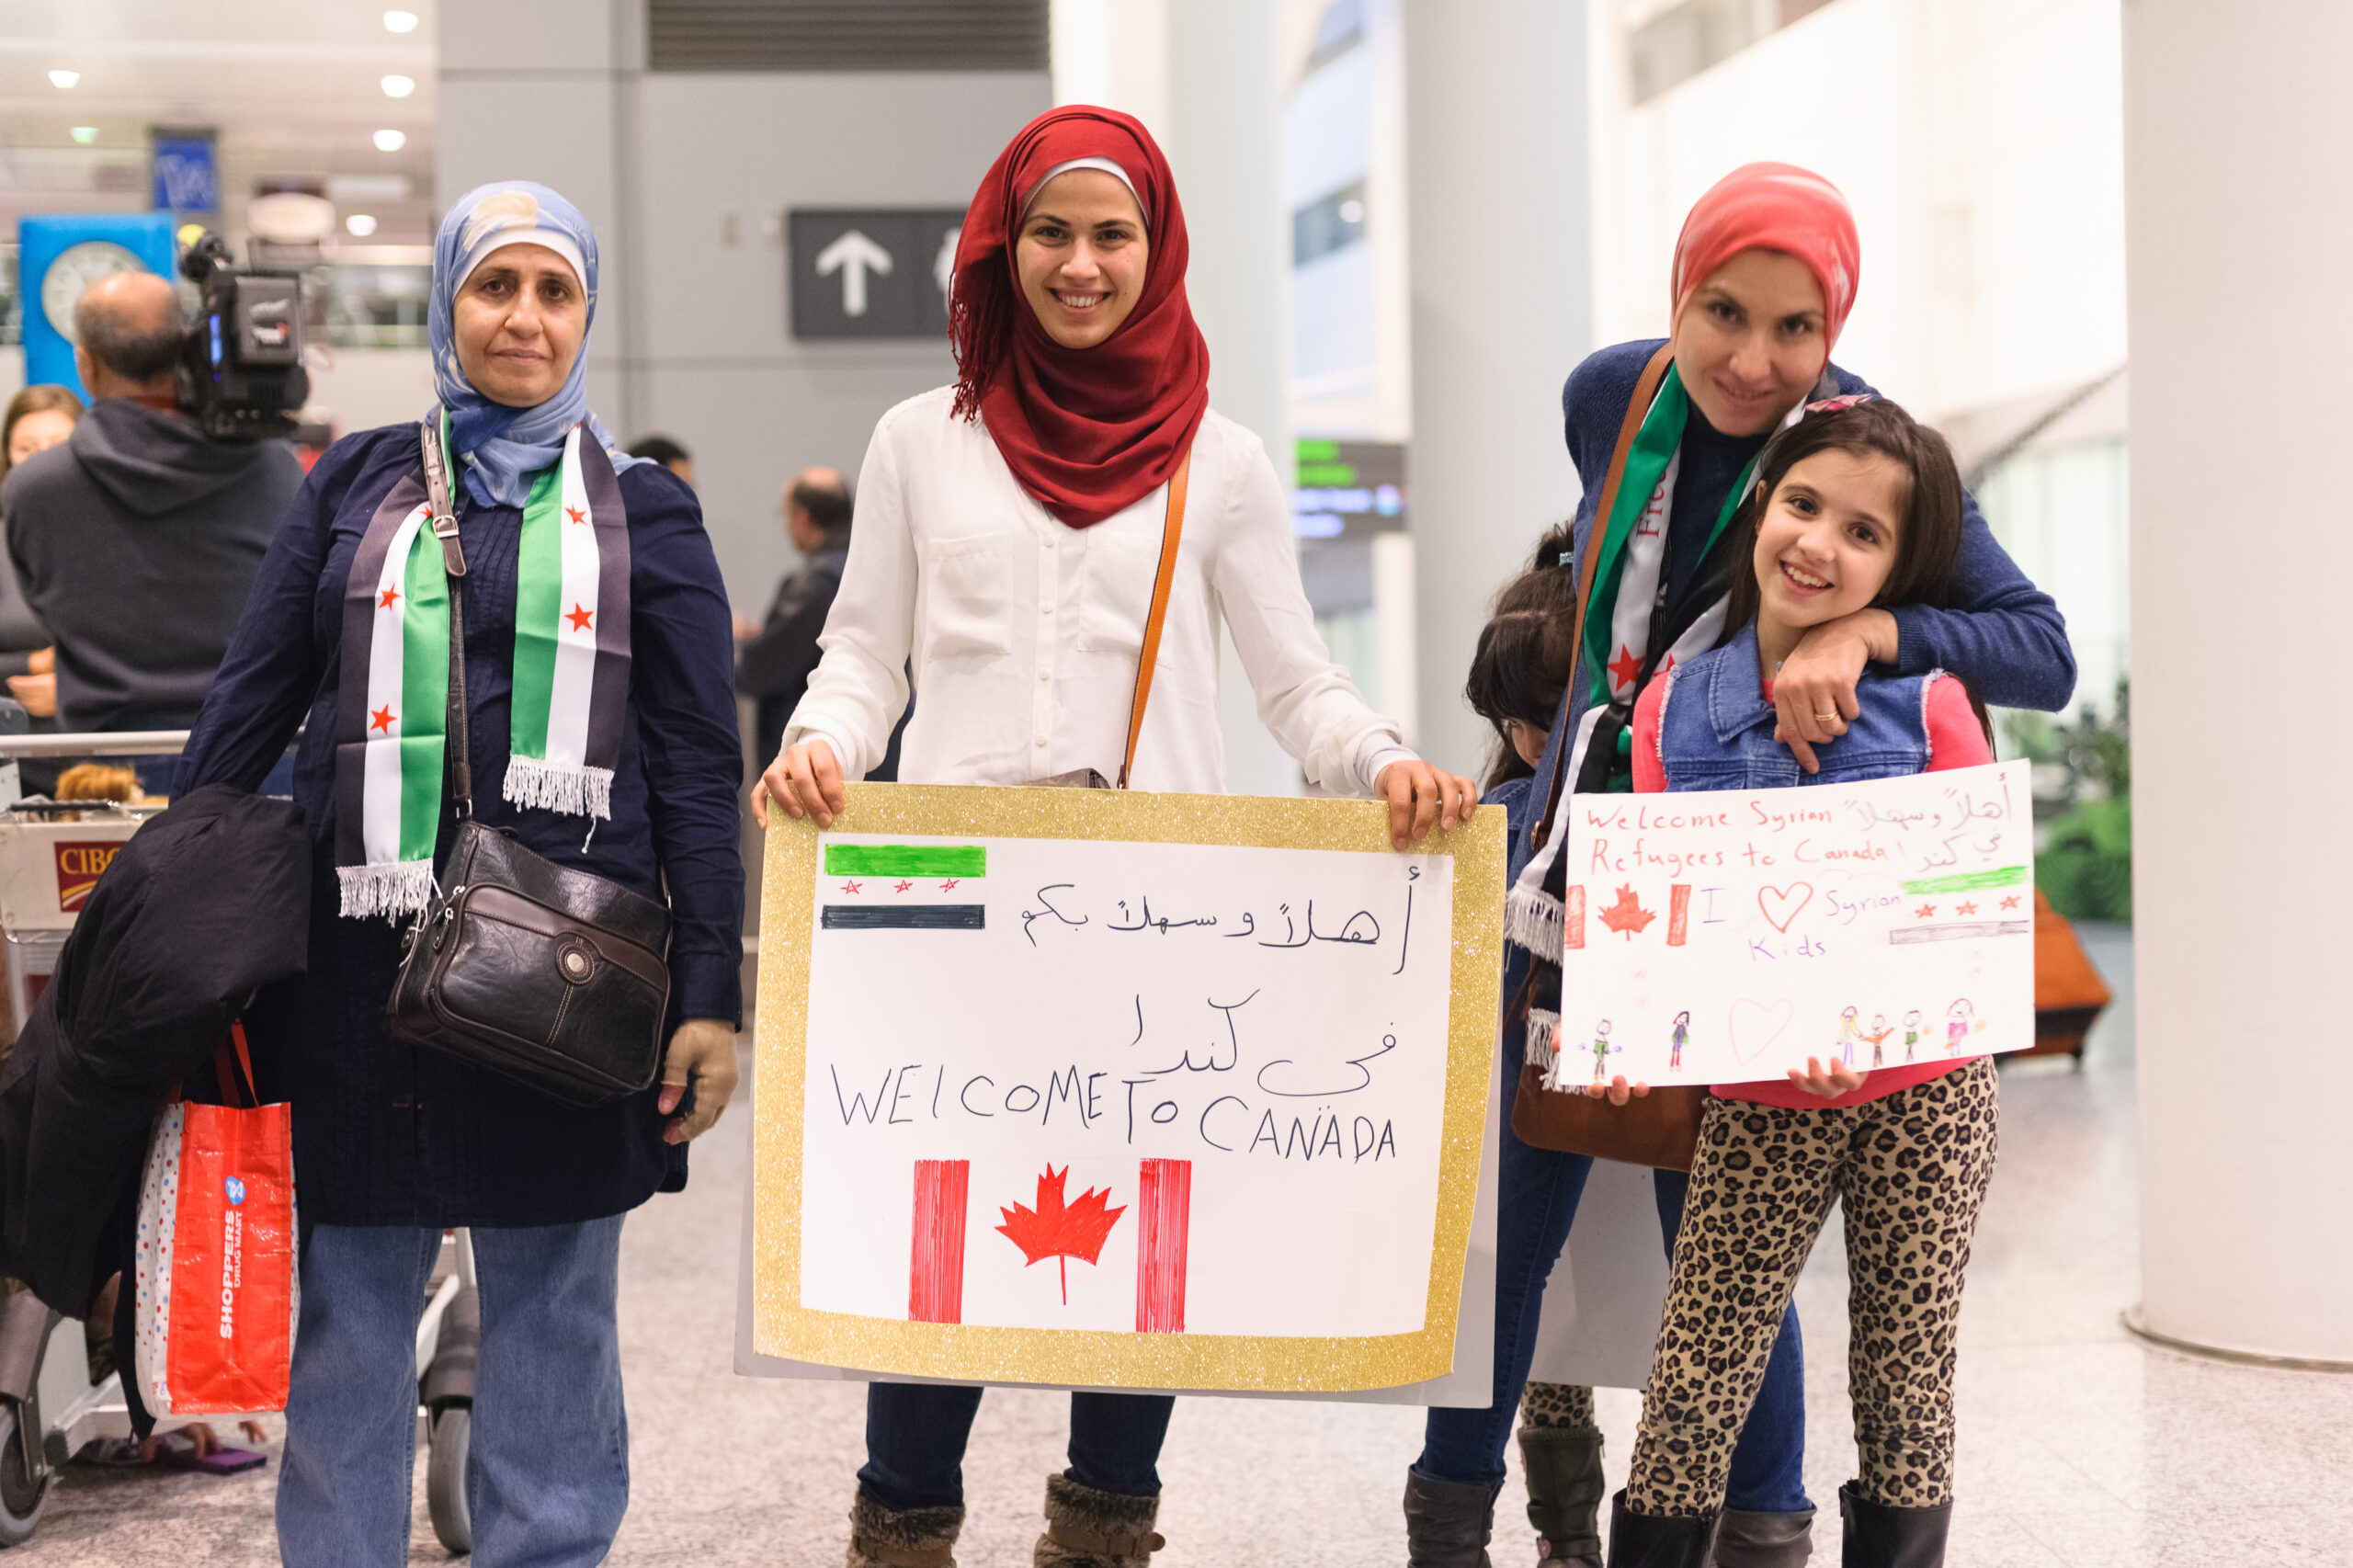 Toronto, Canada - December 11, 2015: Sponsors, family, and Canadians simply wishing to welcome their new neighbours await the first plane's arrival of Syrian refugees at Toronto's Pearson International Airport. |